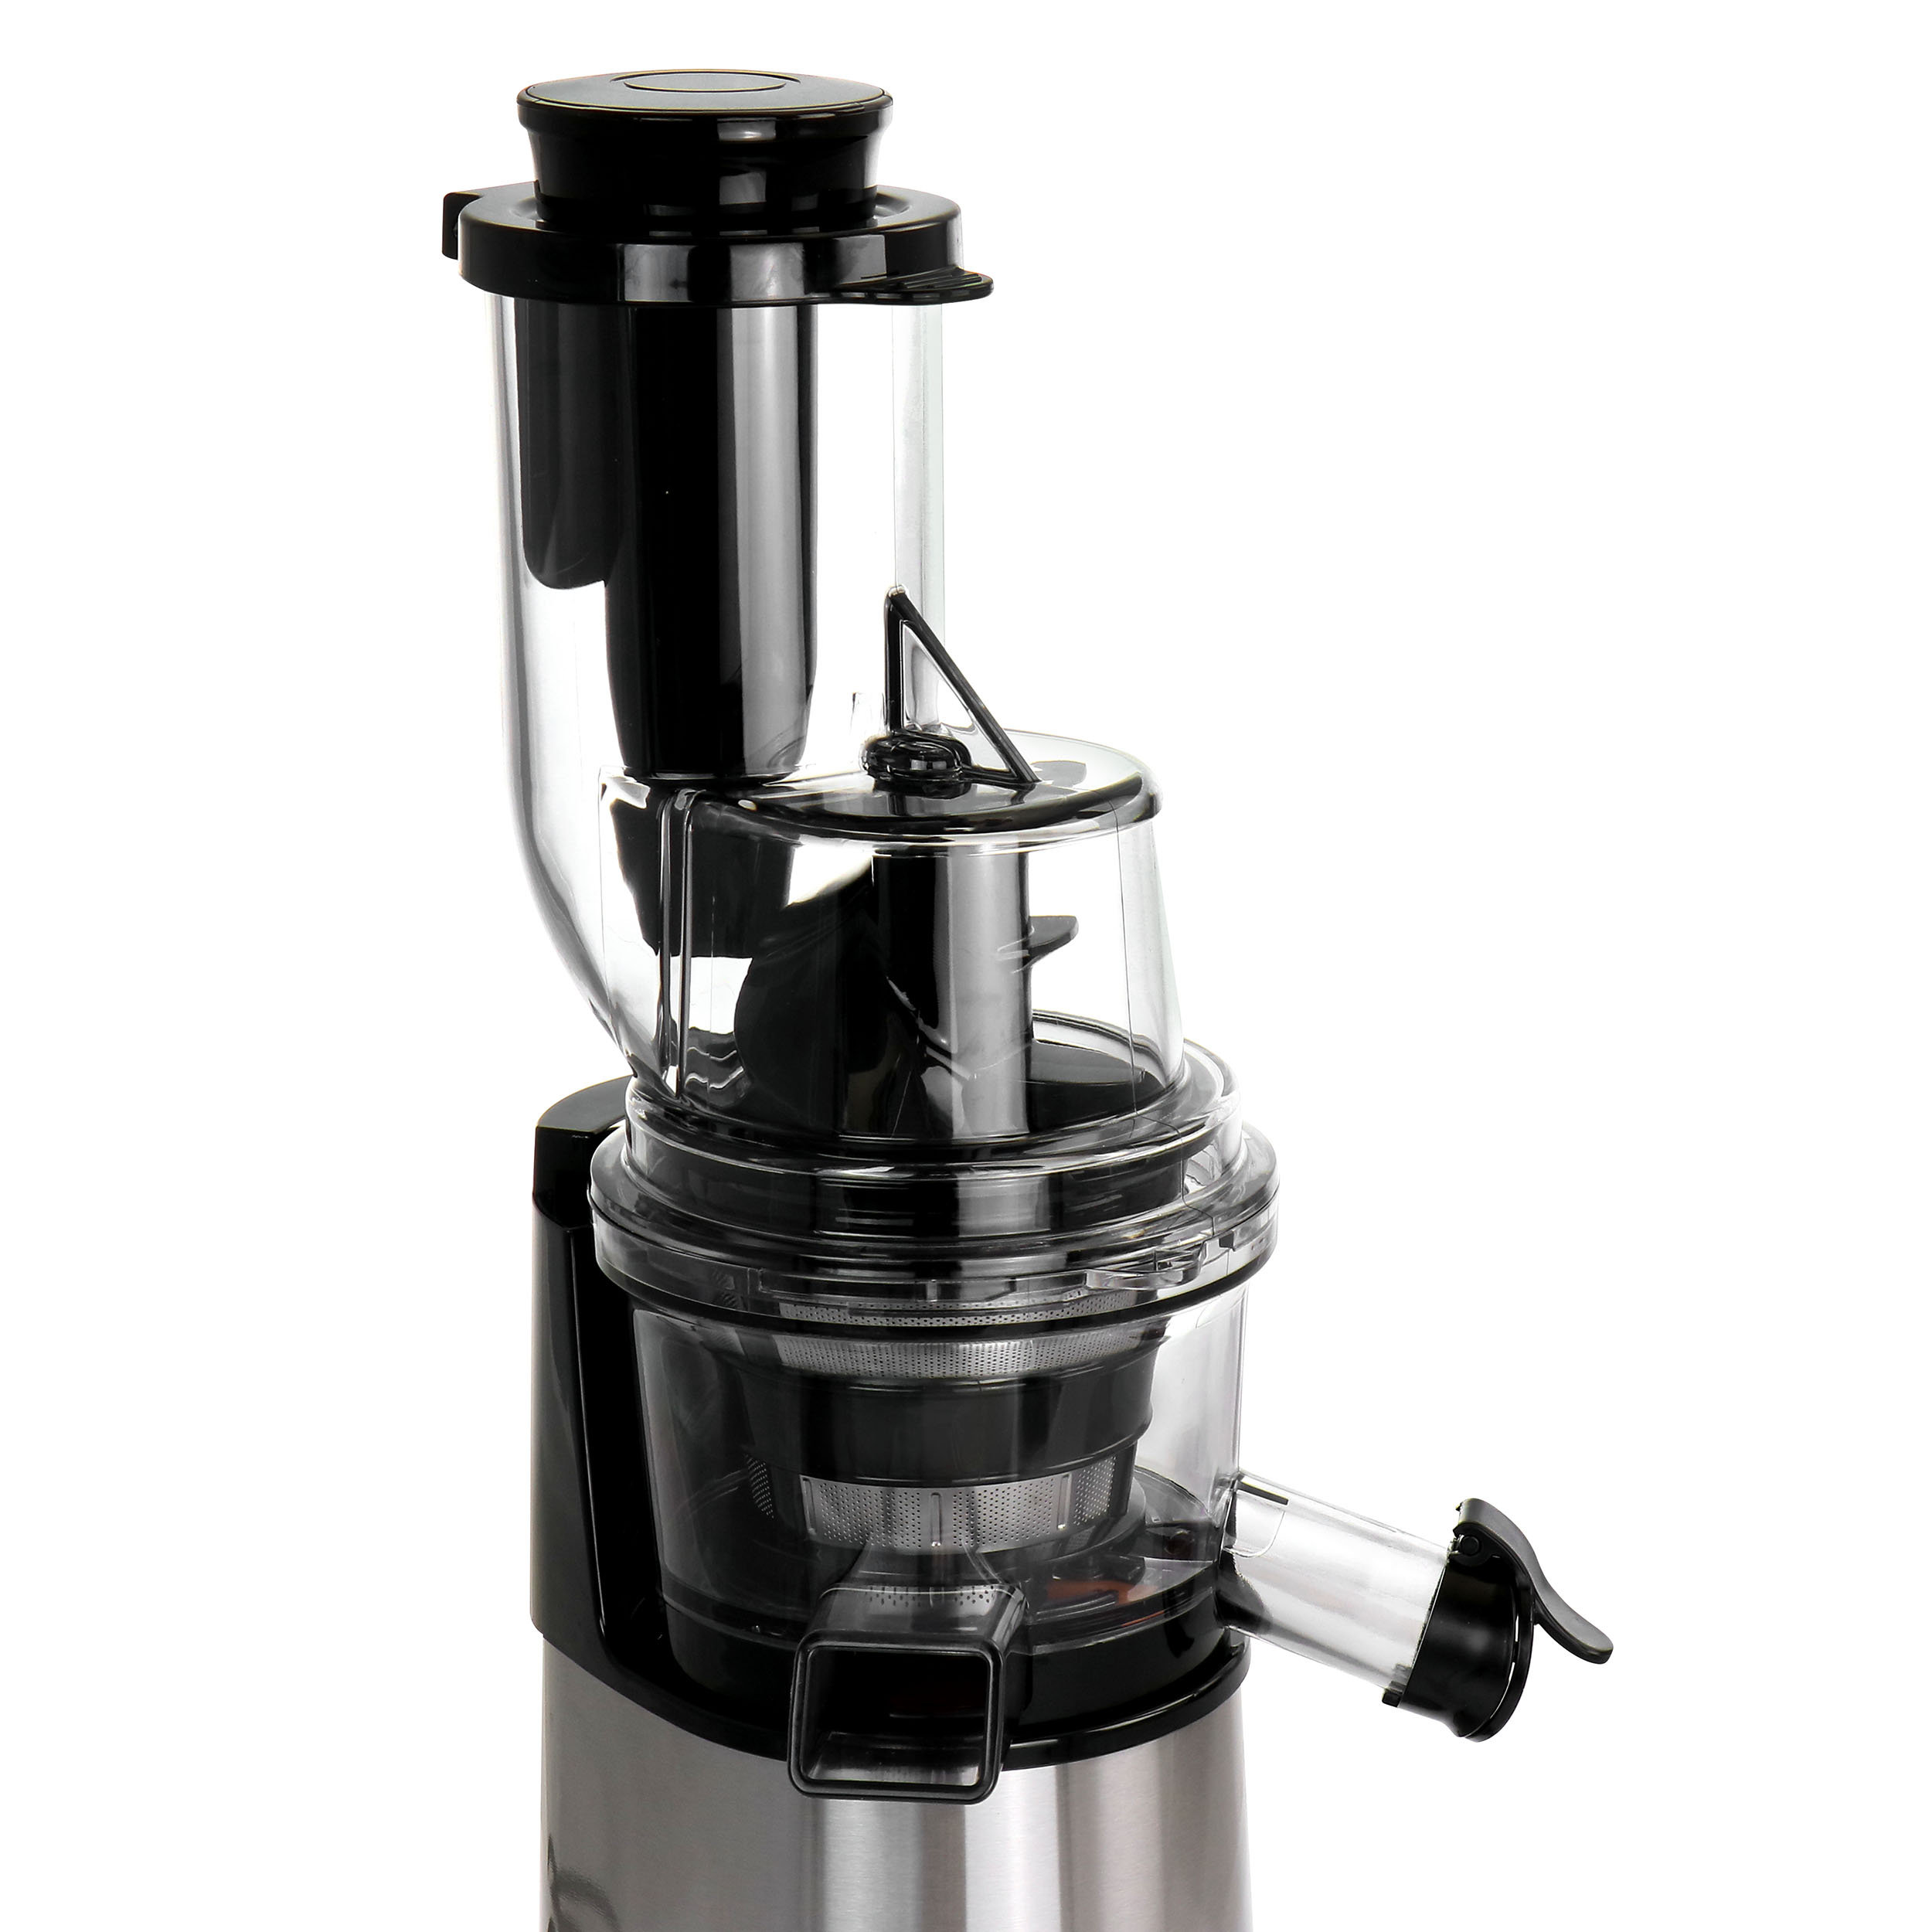 Hamilton Beach Big Mouth Juice & Blend 2-in-1 Juicer and Blender 67970